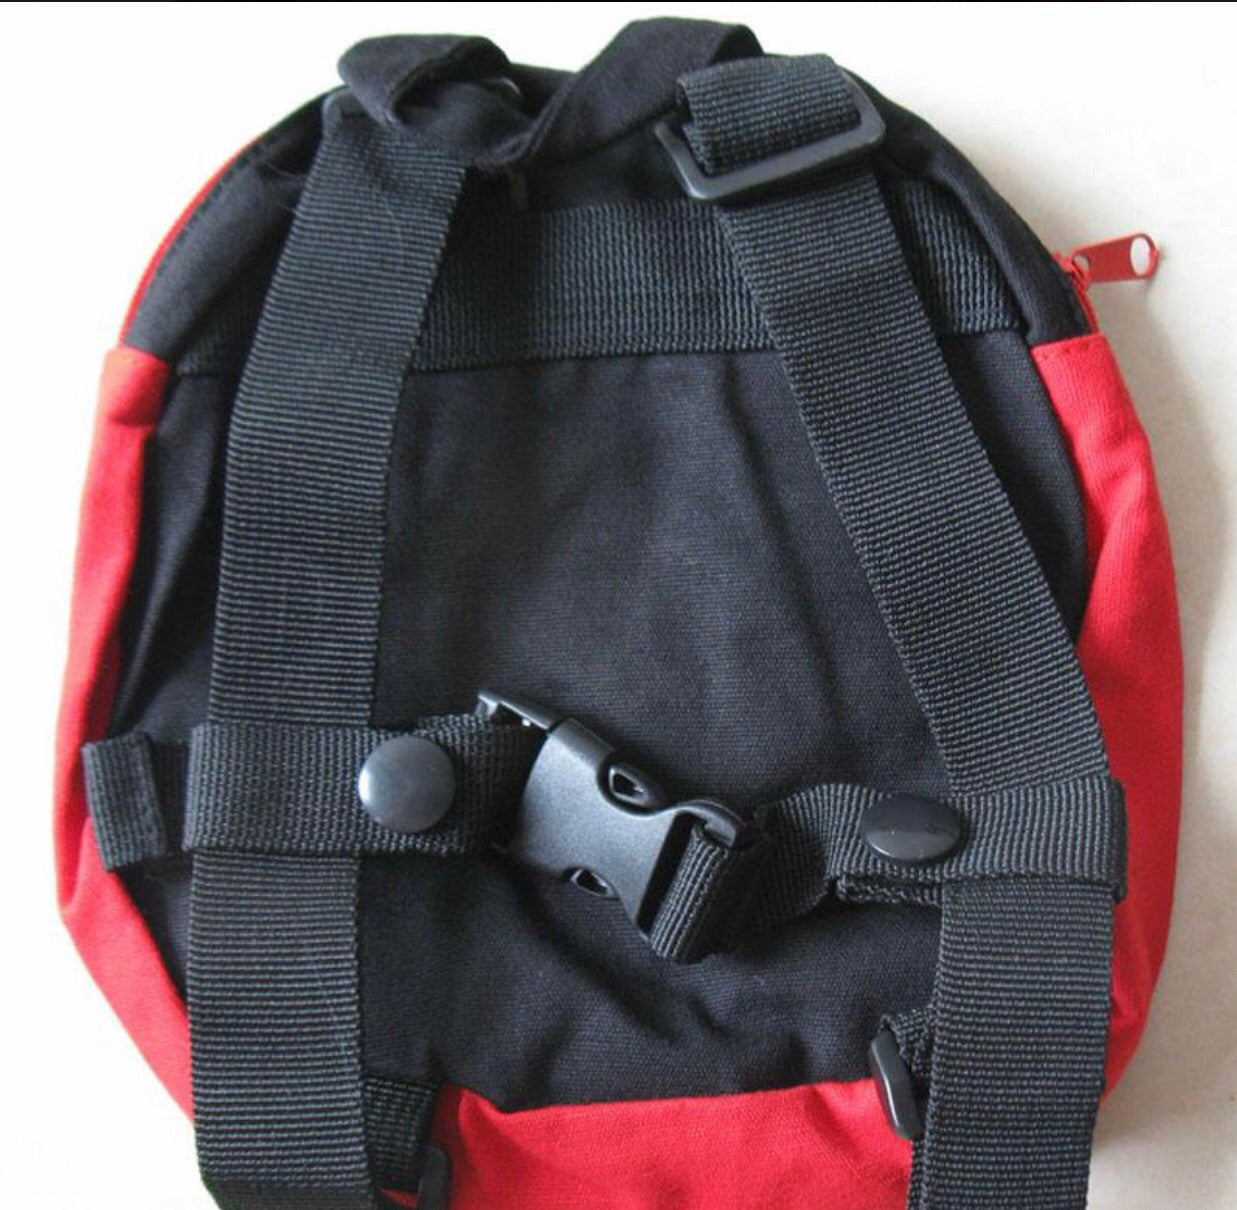 kid keeper safety harness backpack